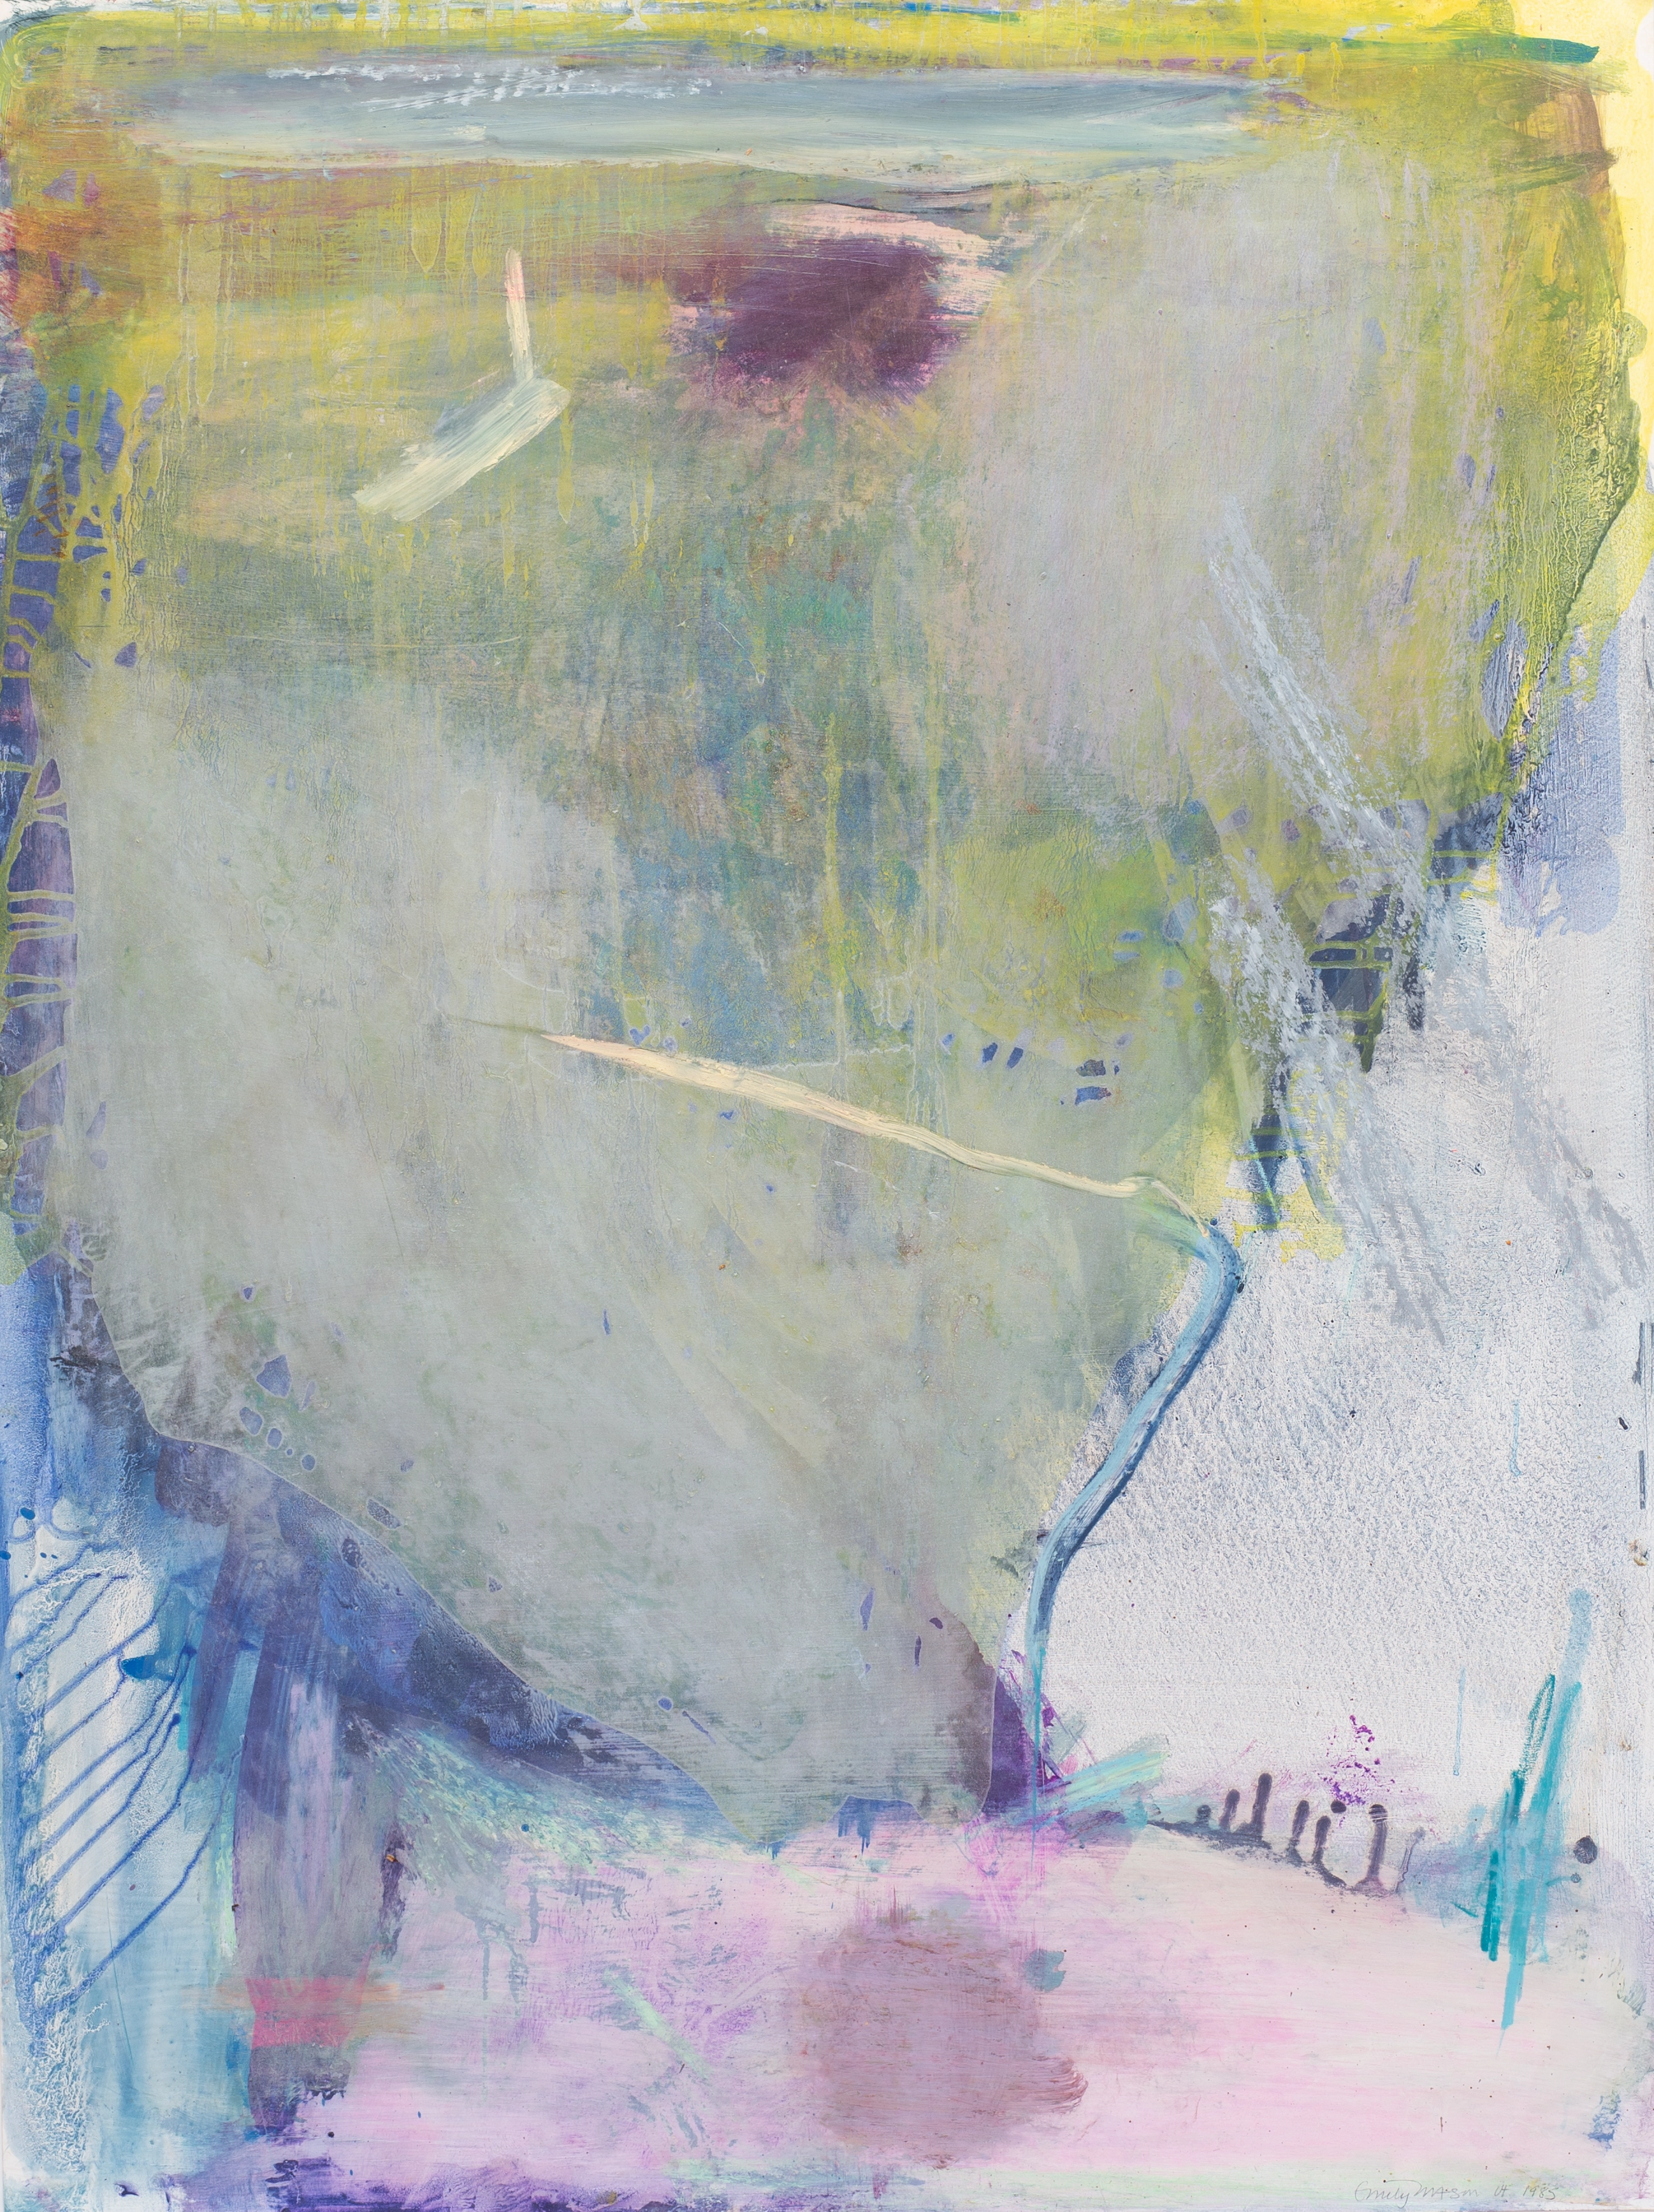 Abstract oil on paper work with greys, purples, pinks and blue drips on top of a green wash of color.